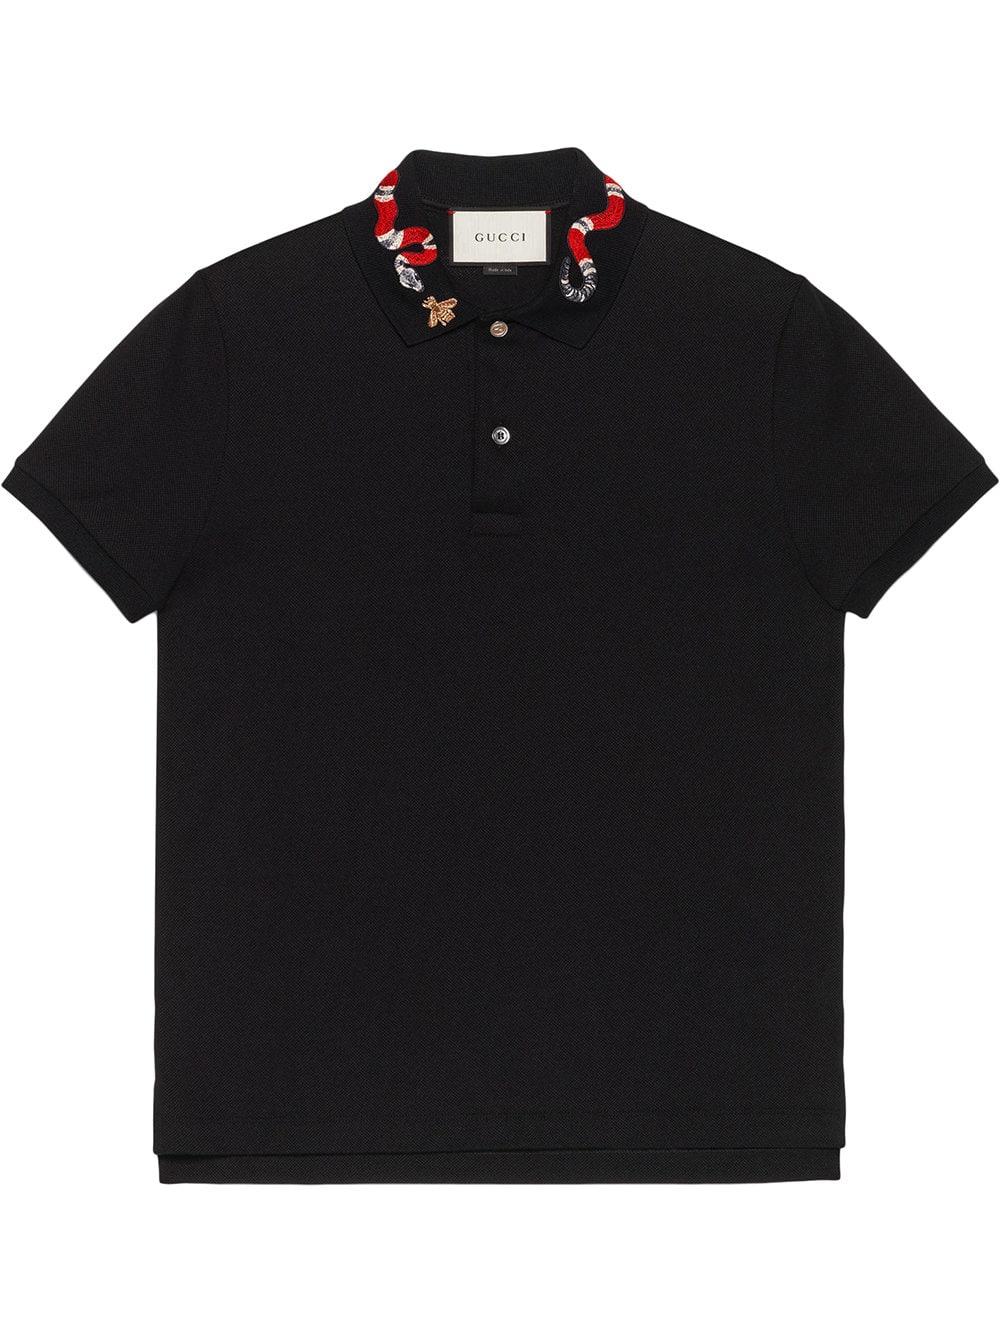 Gucci Cotton Polo With Snake Embroidery in Black for Men - Lyst